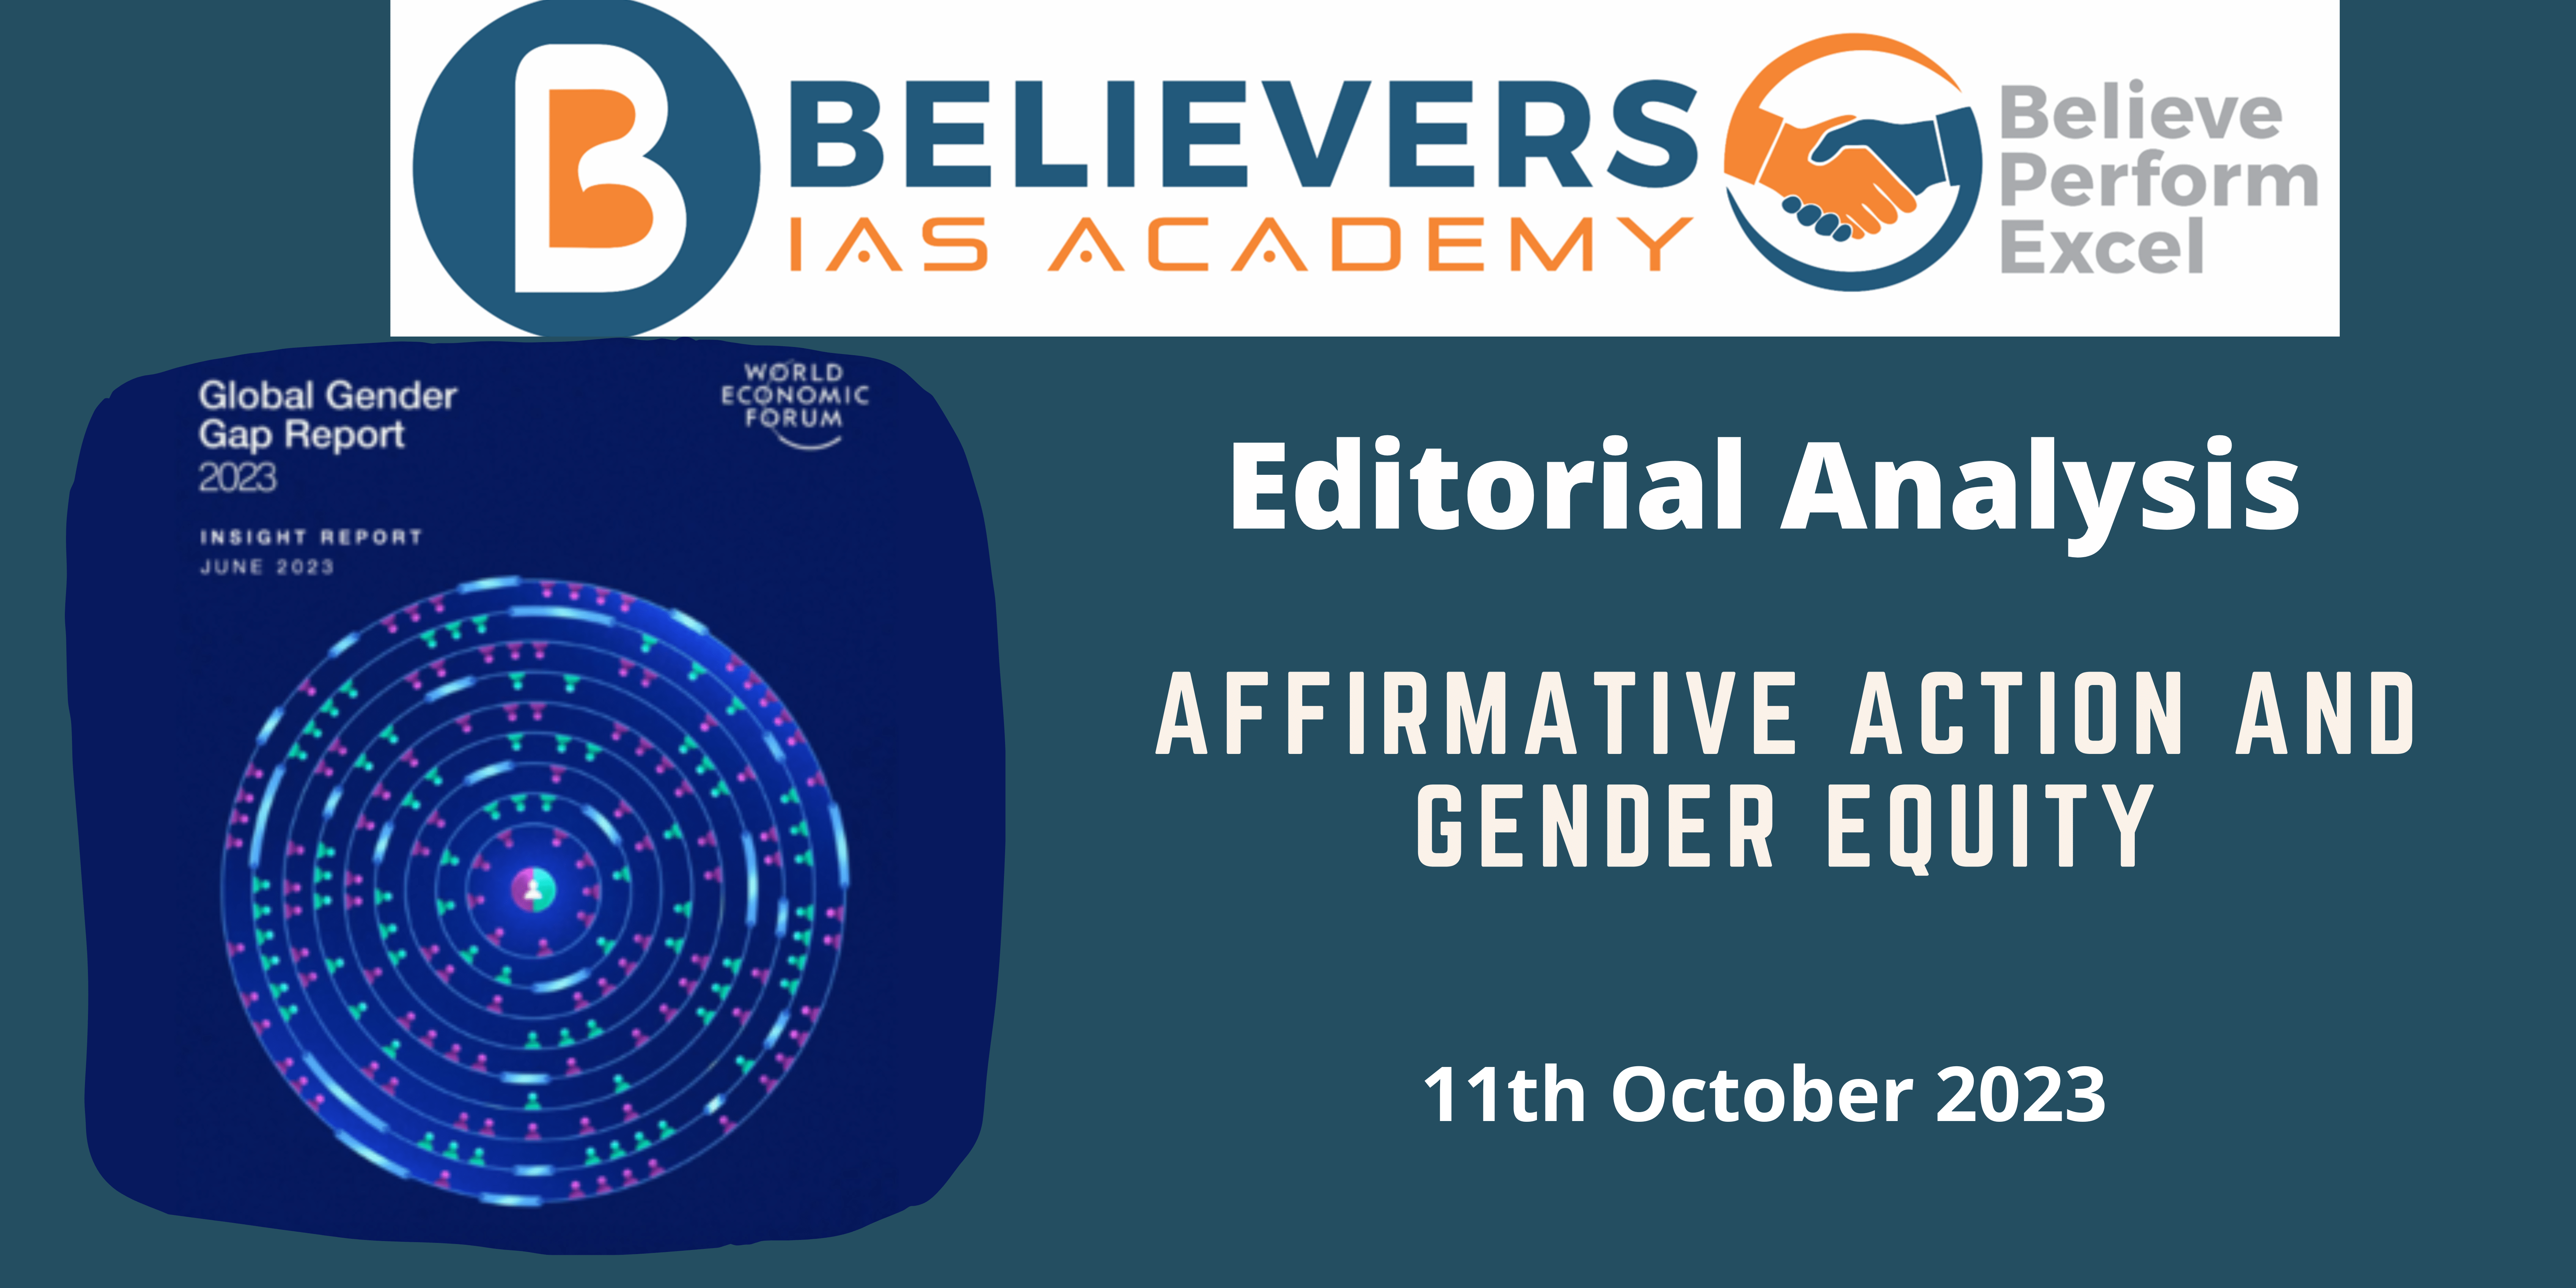 Affirmative Action and Gender Equity